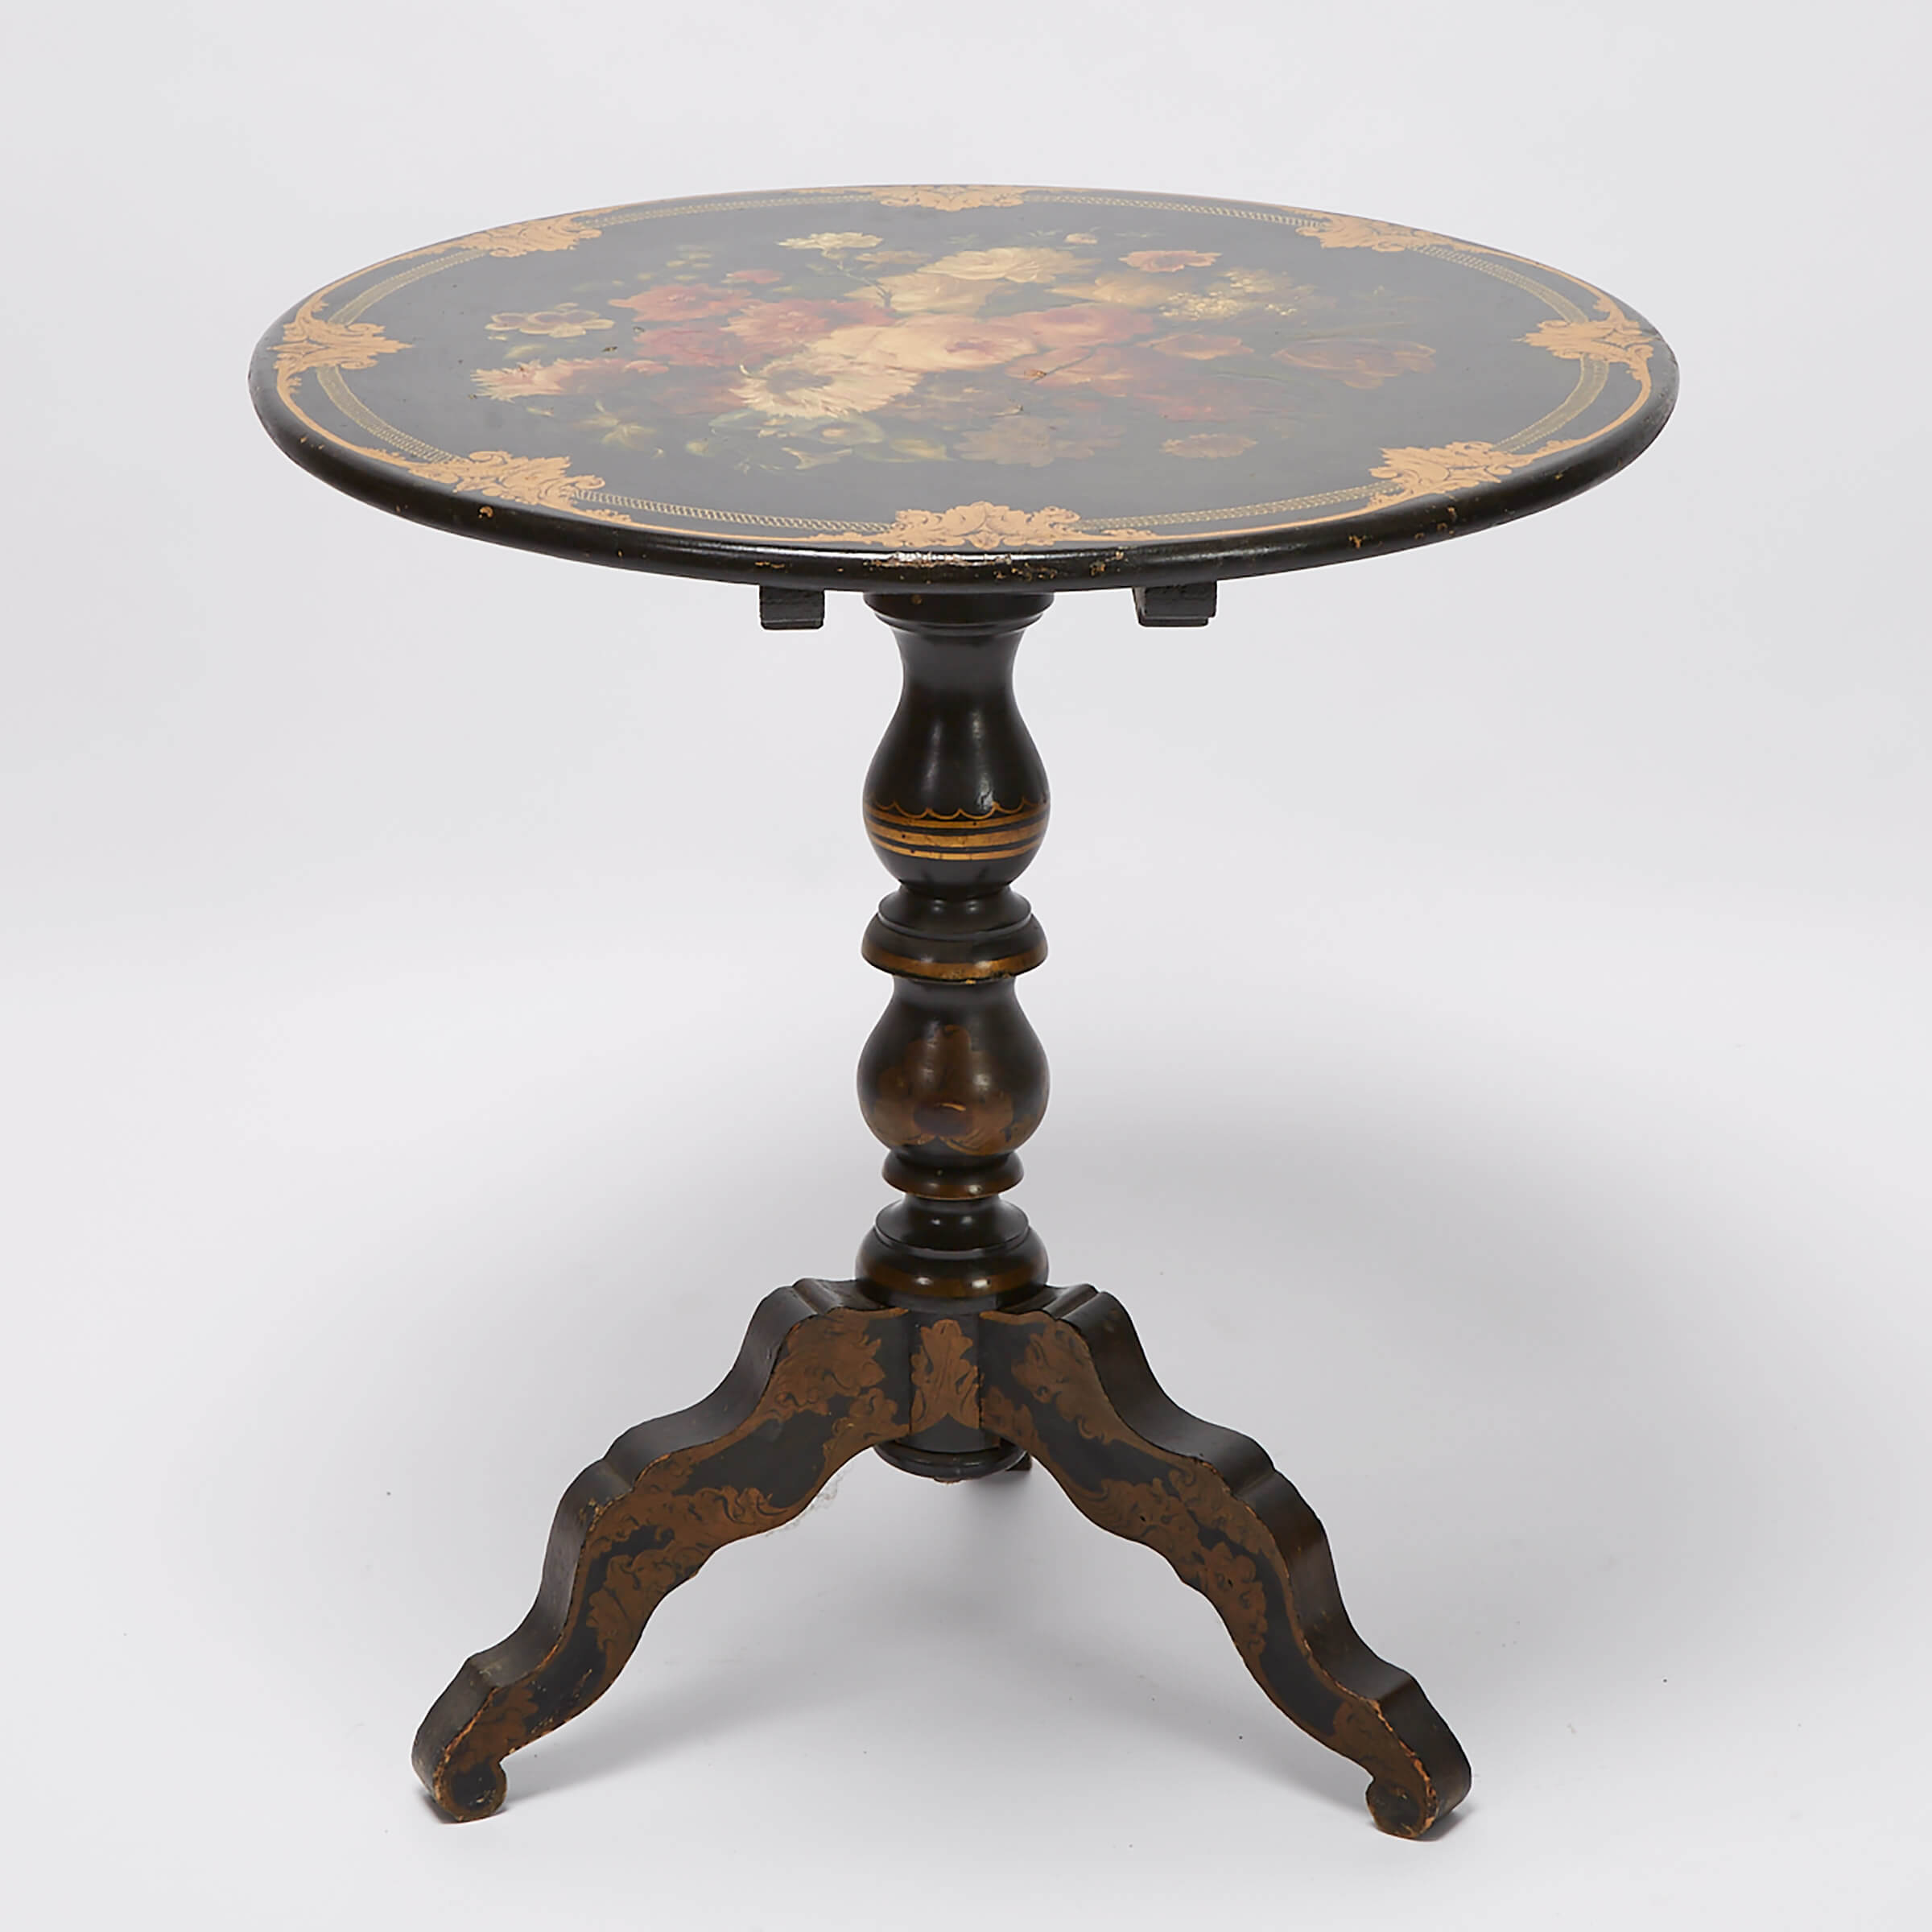 Victorian Painted Tilt Top Table, mid 19th century